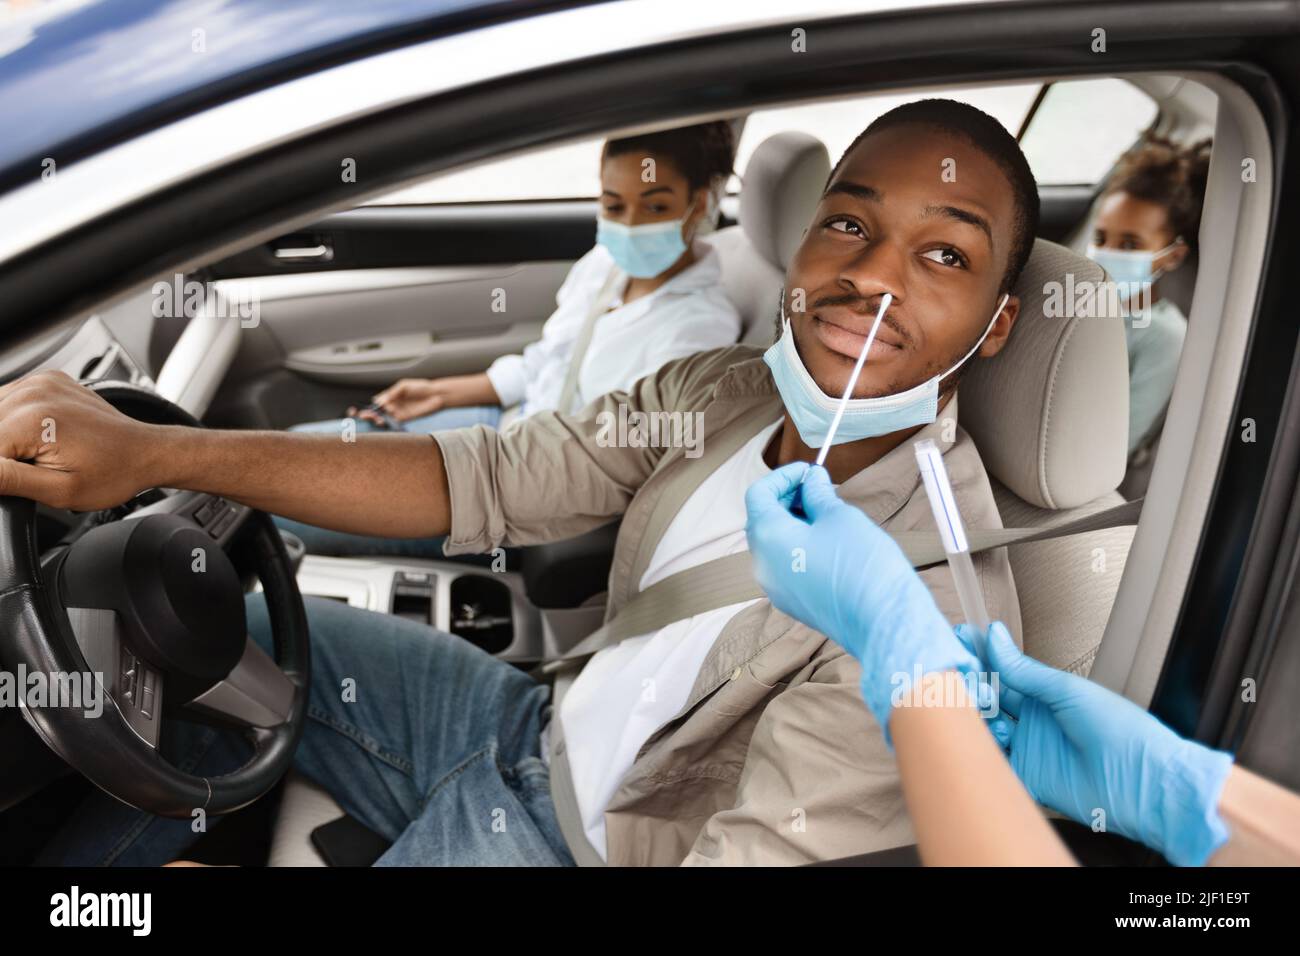 African American Man Getting Tested For Coronavirus In Car Stock Photo